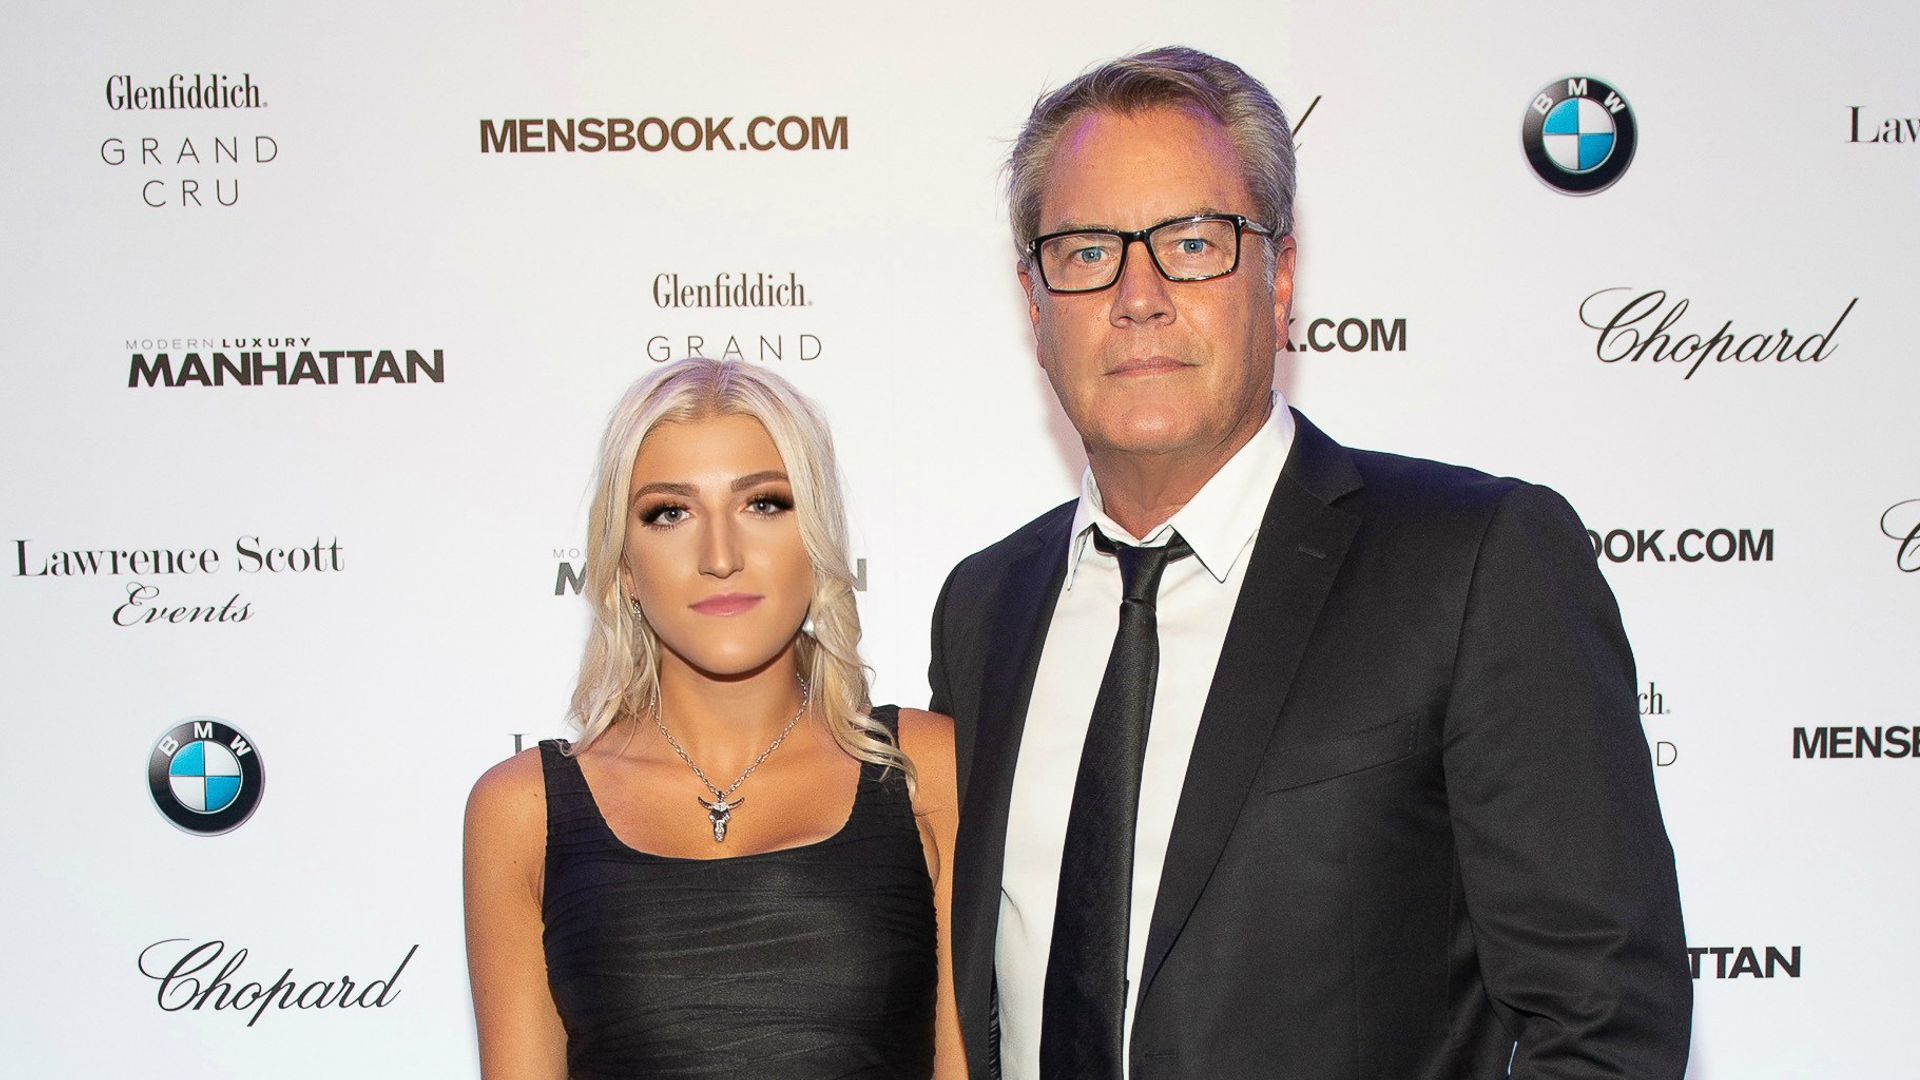 Alba Jancou and Peter Cook attend the Manhattan Magazine and Mensbook.com event on October 22, 2019 in New York City